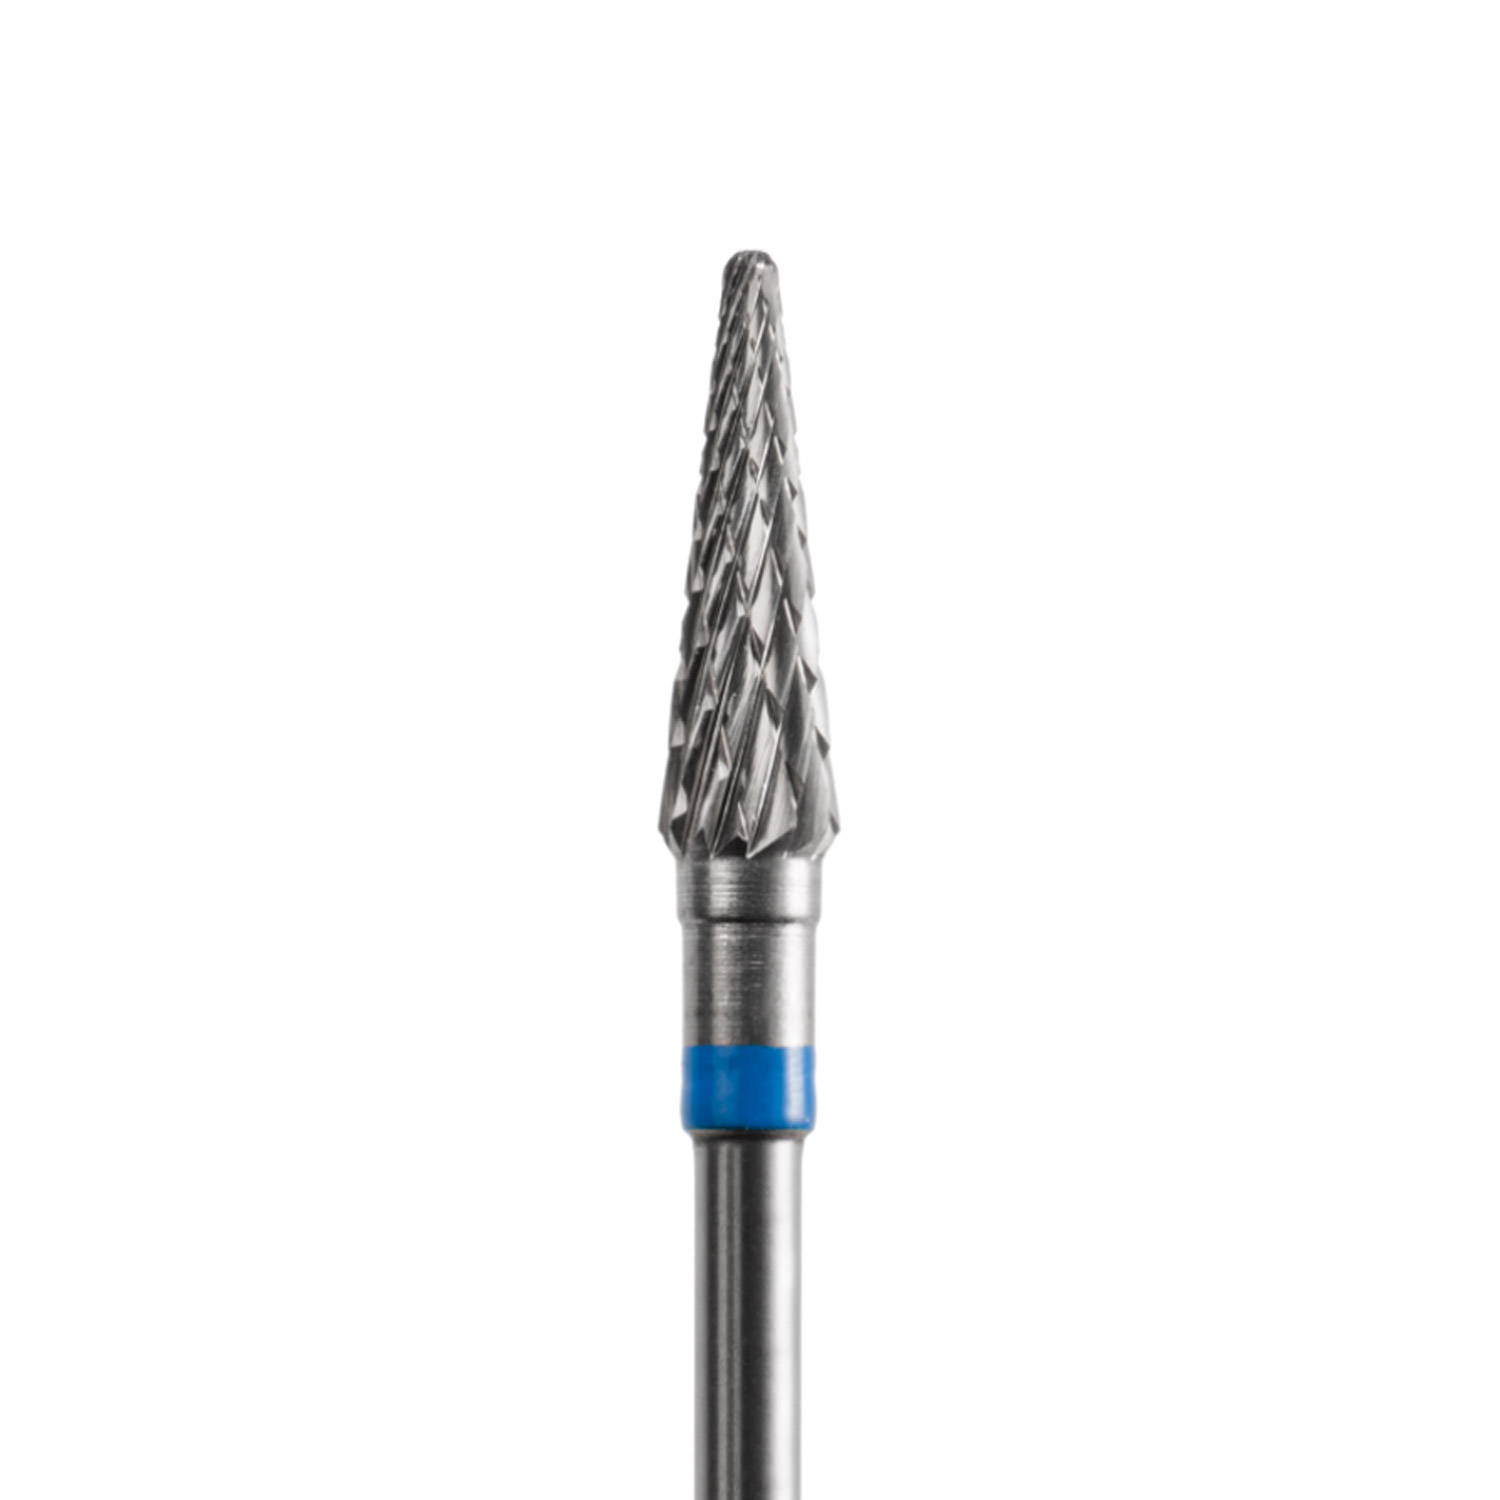 Acurata professional milling tool with moderate cross cut AC-66 ACURATA - 190 Series - Gel Removal